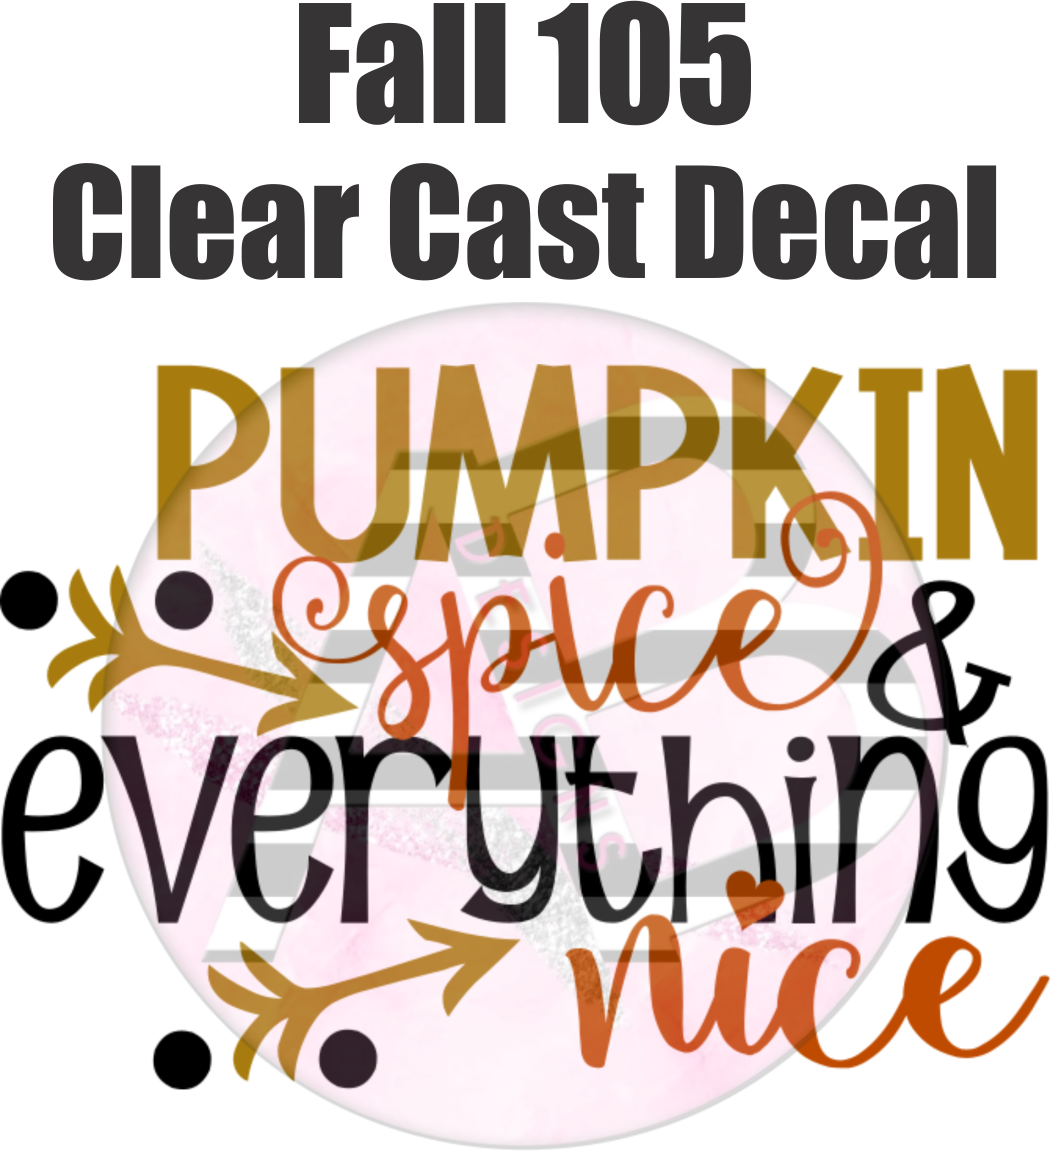 Fall 105 - Clear Cast Decal